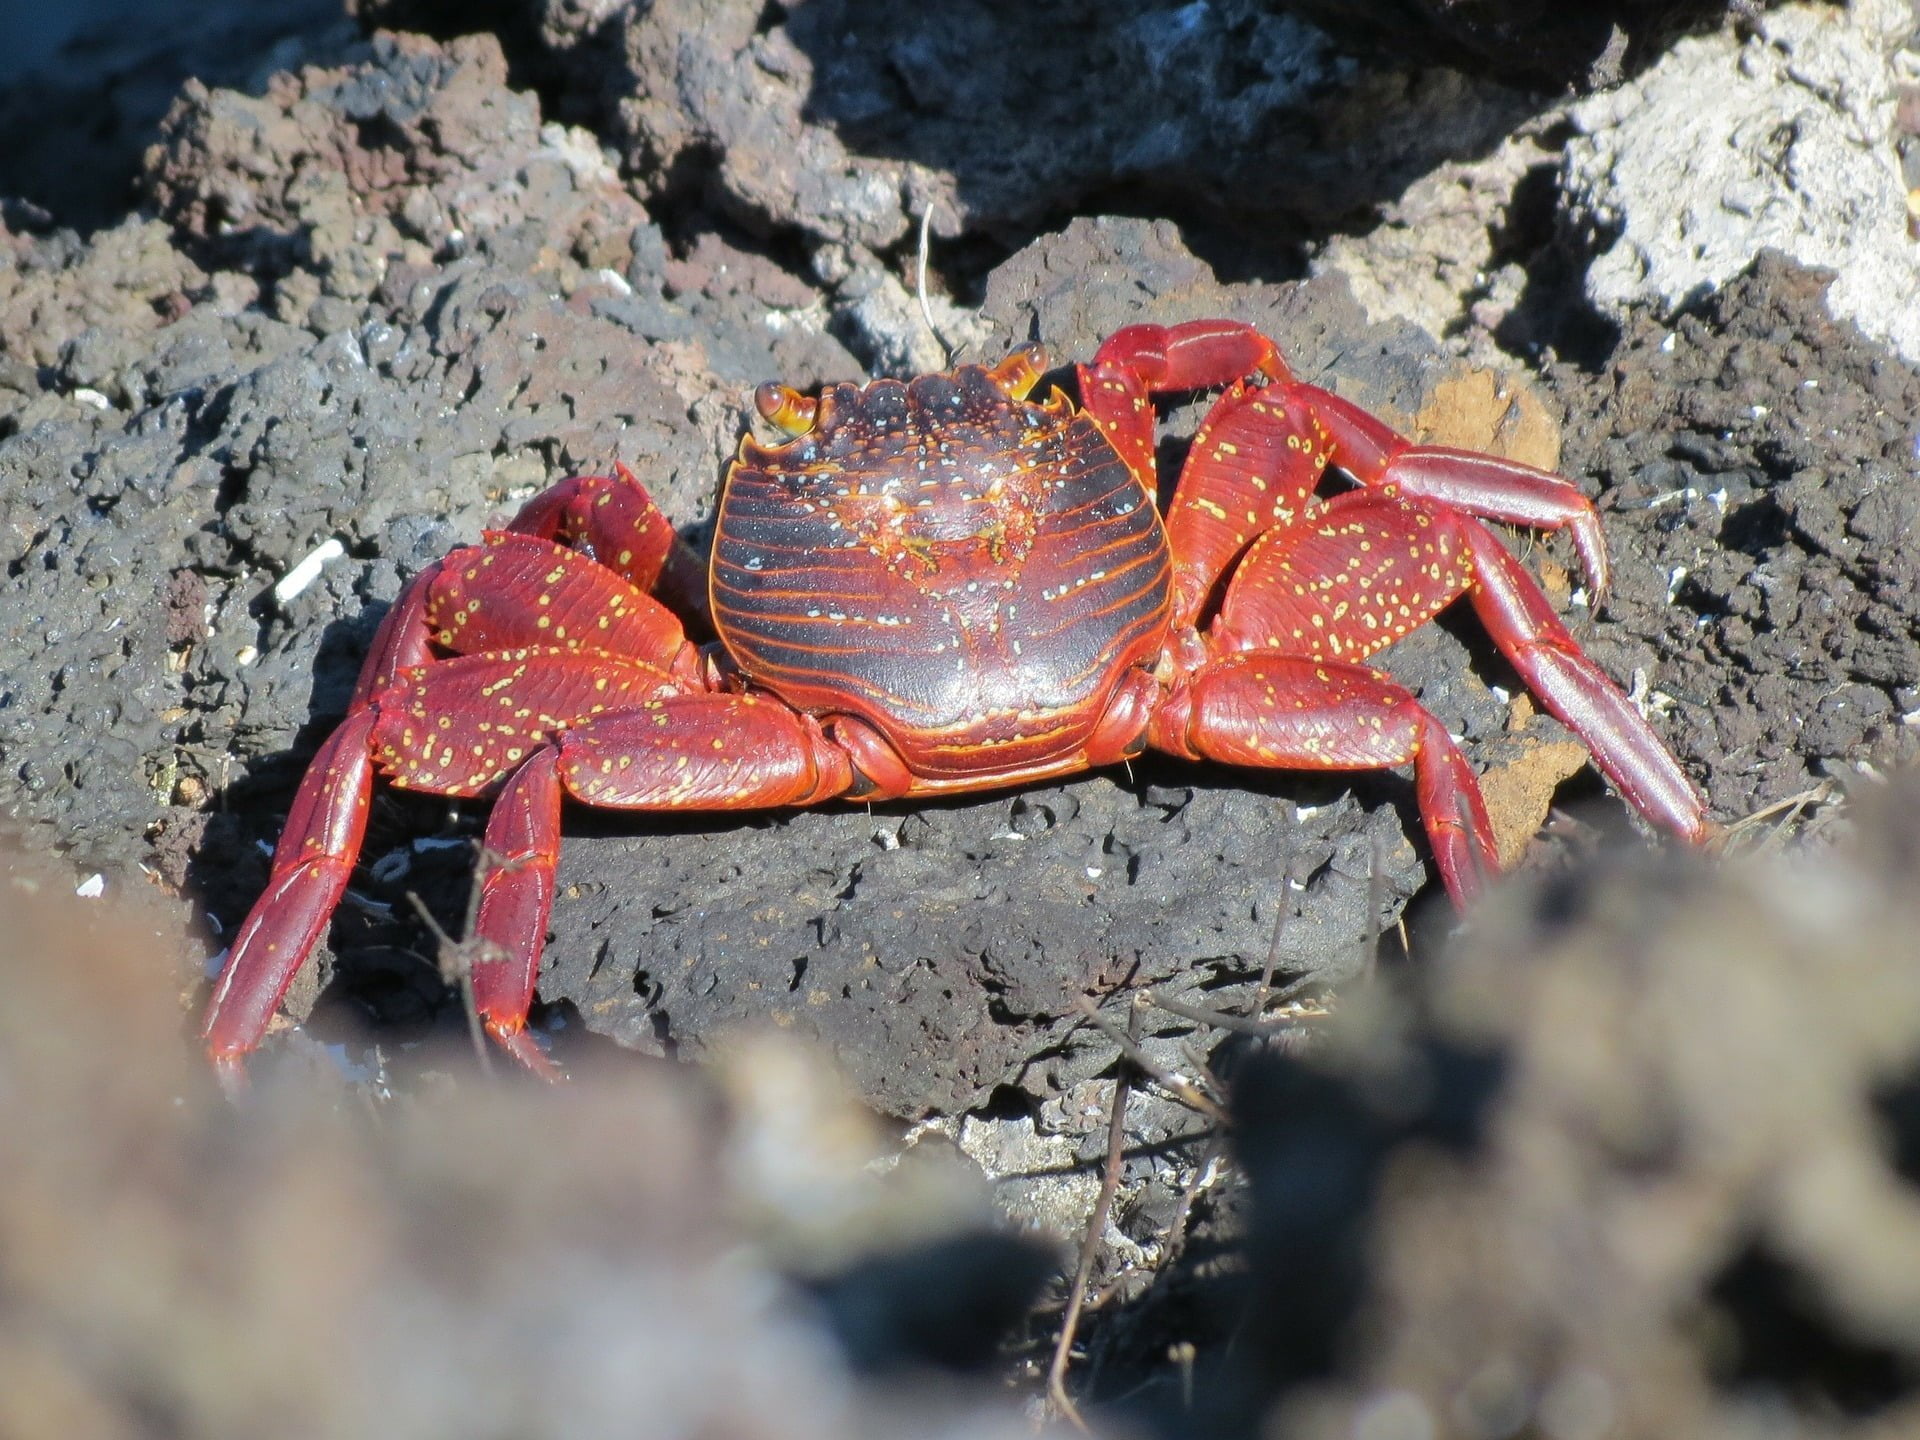 crab g3824c03fb 1920 Lost and Found: How a Single Clue Led to the Rediscovery of a Crab Not Seen for 225 Years